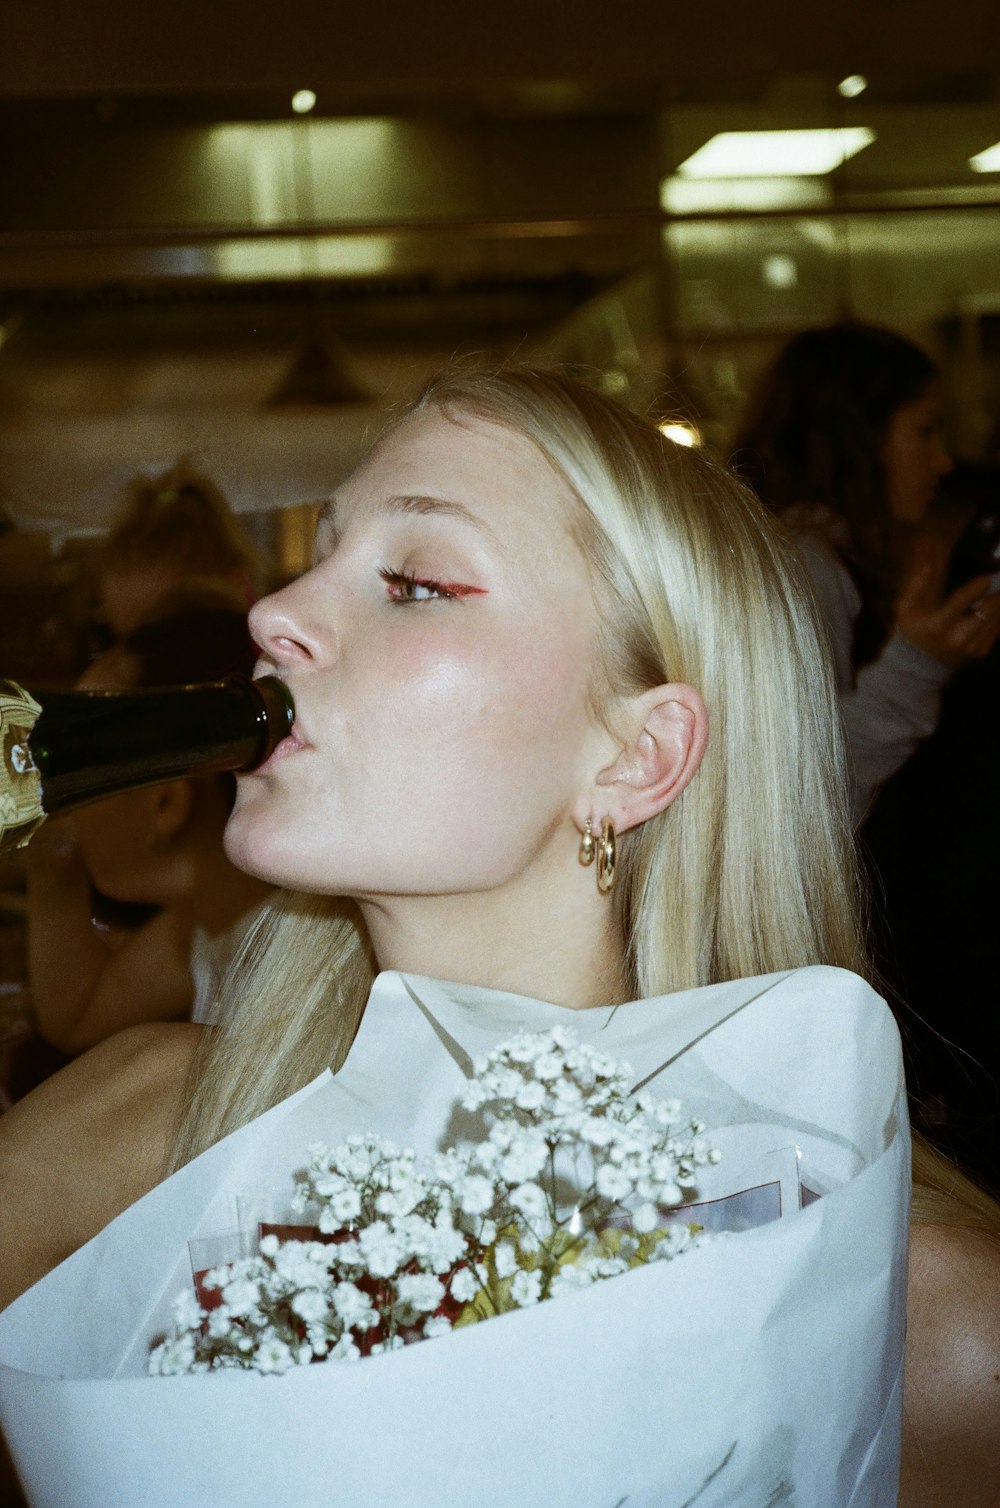 a woman drinking a bottle of wine while holding a bouquet of flowers